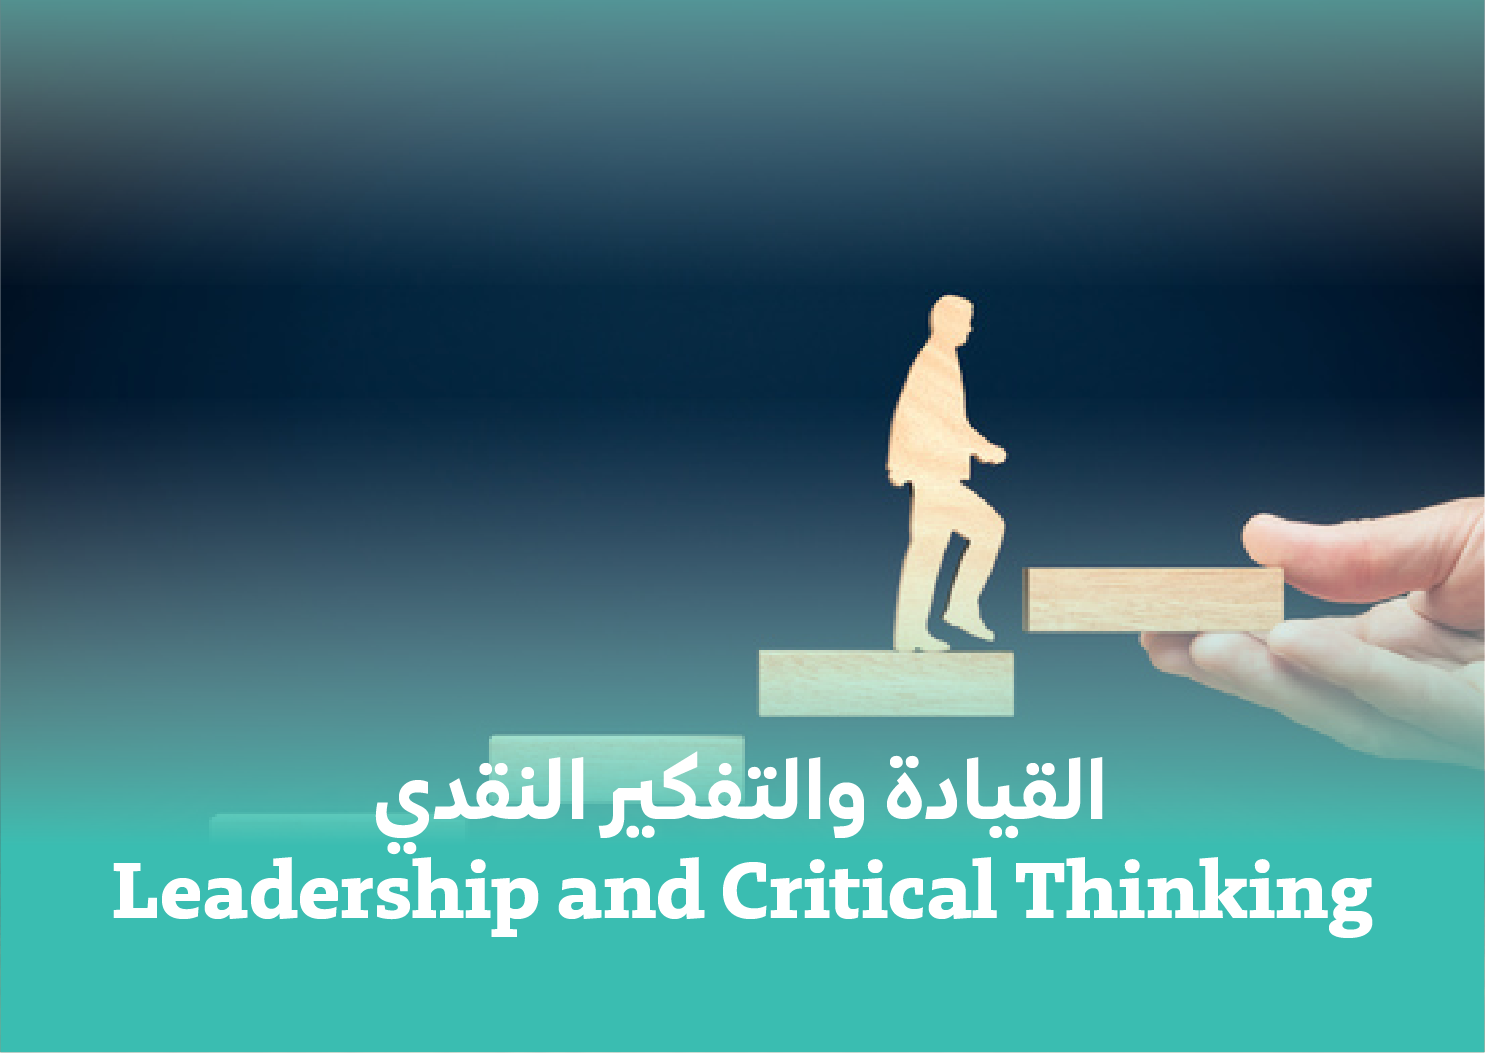  Leadership and Critical Thinking